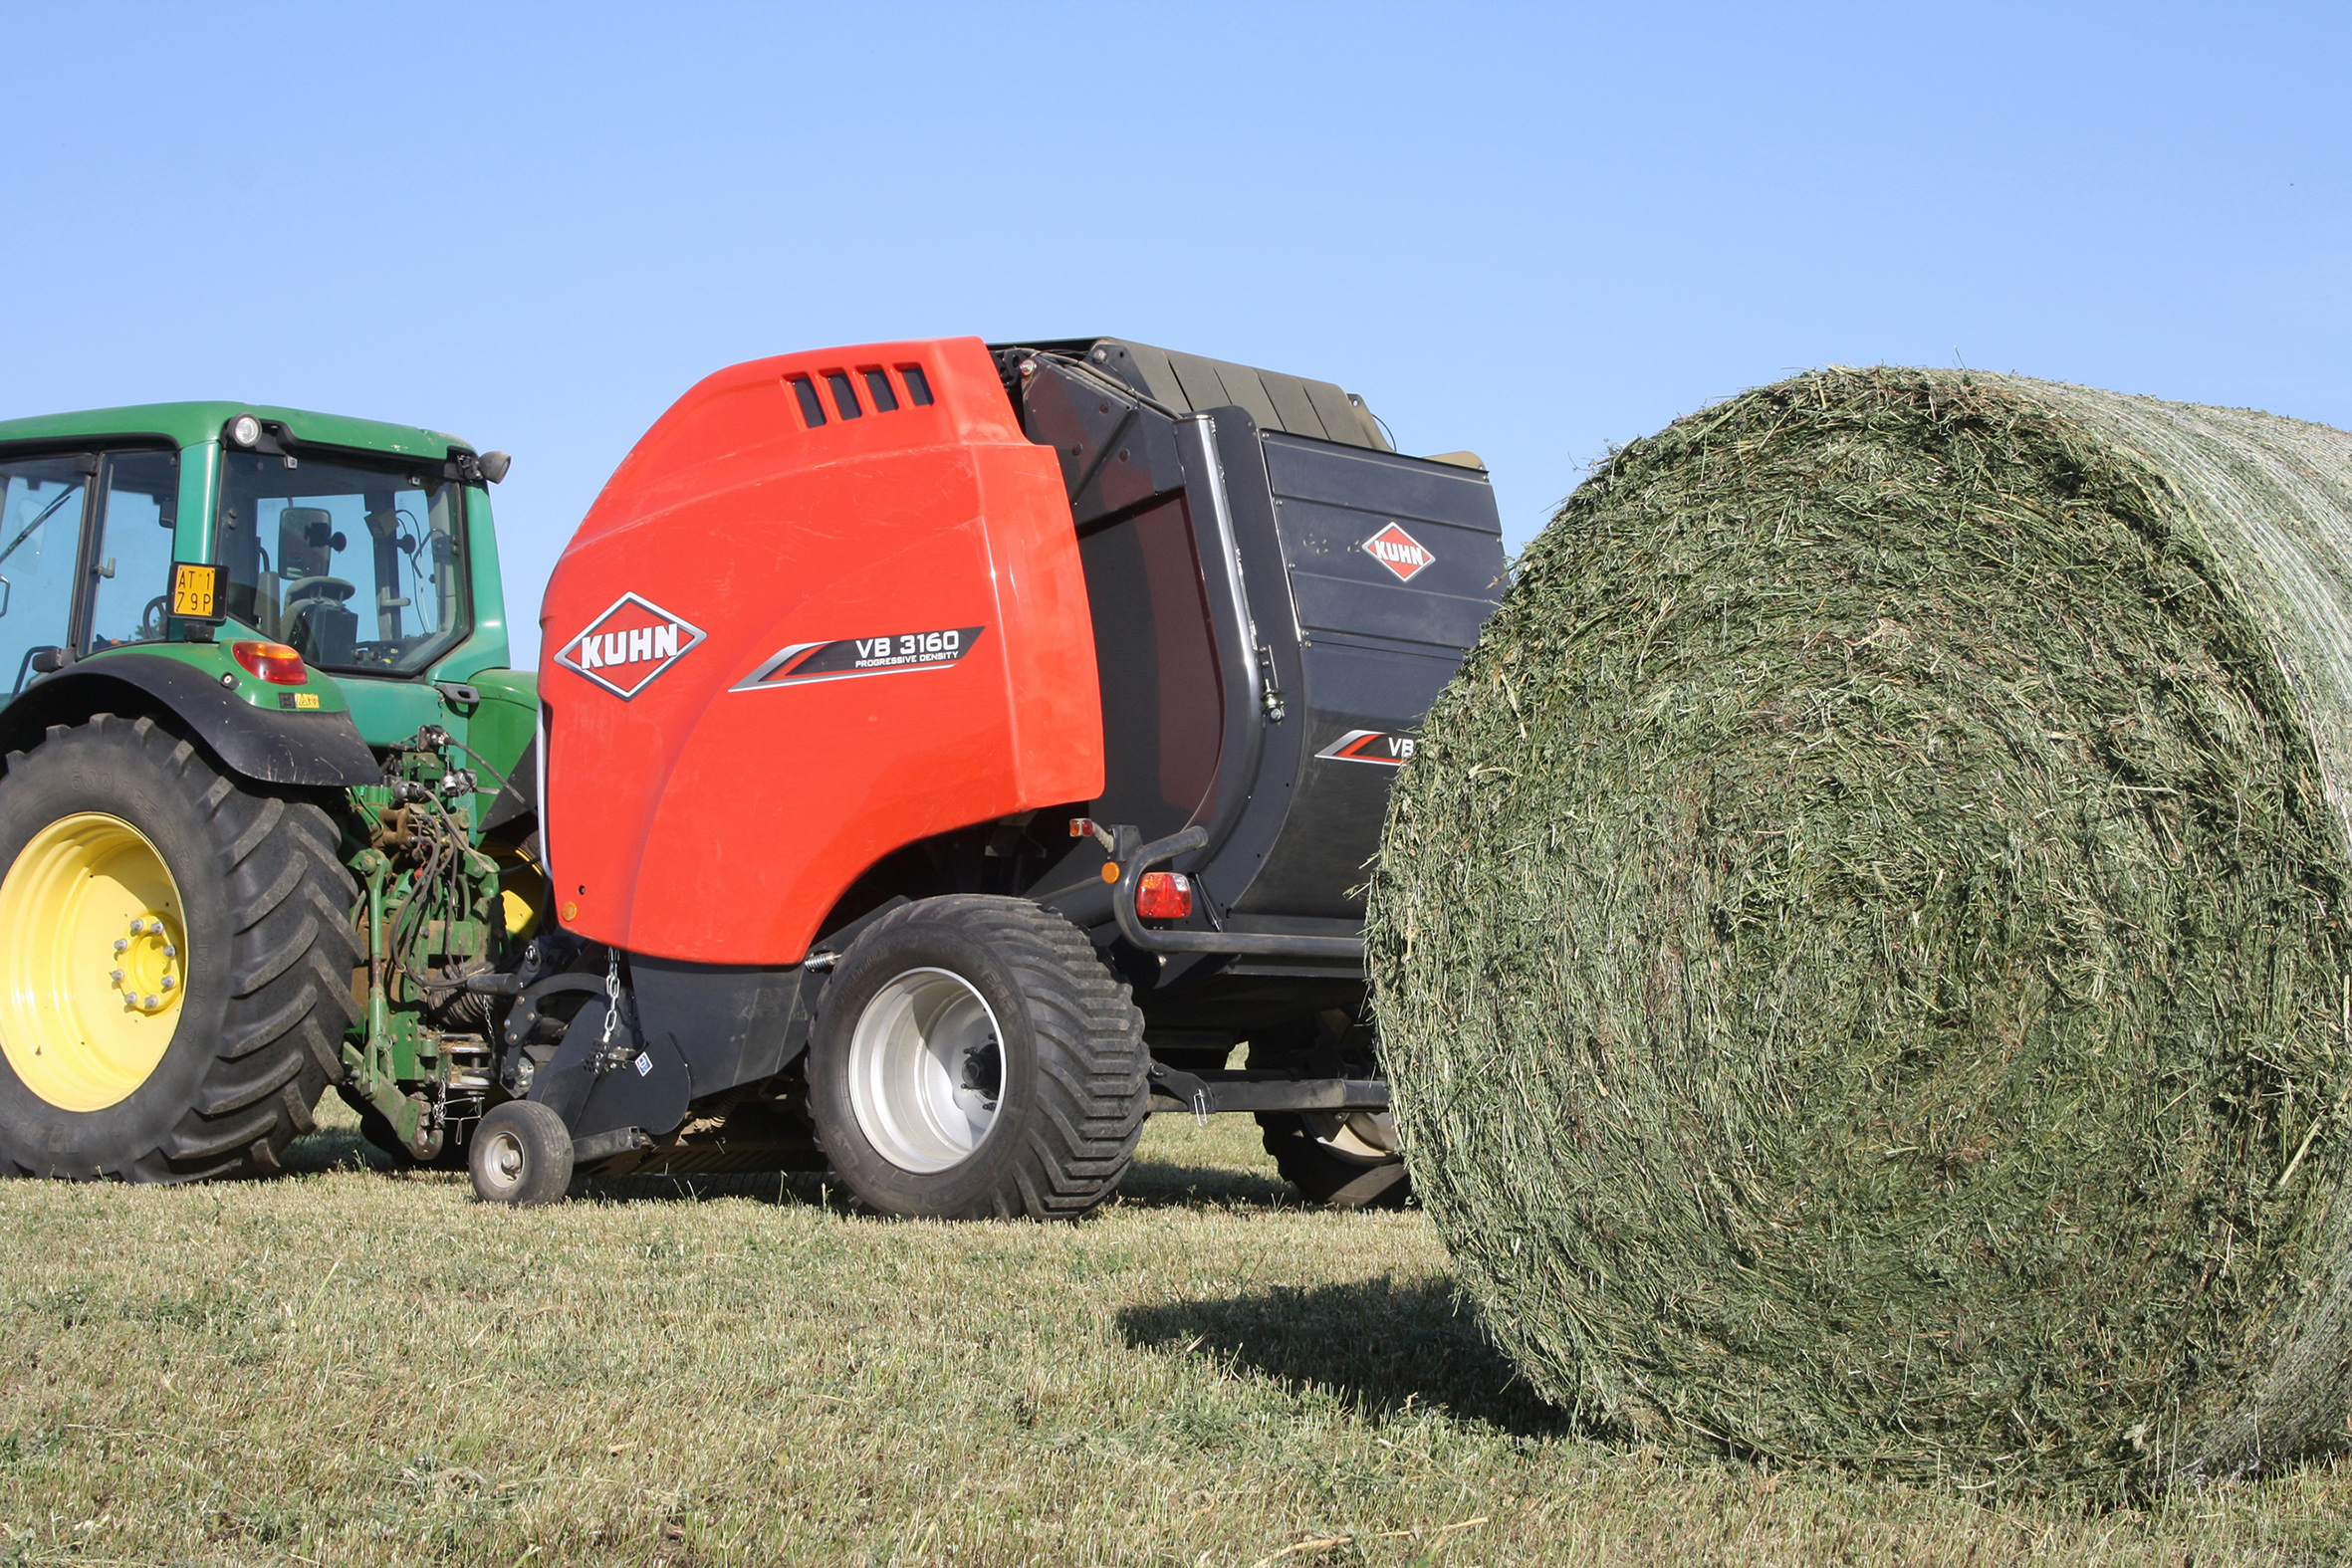 Kuhn variable chamber round balers now available as non-ISOBUS compatible versions